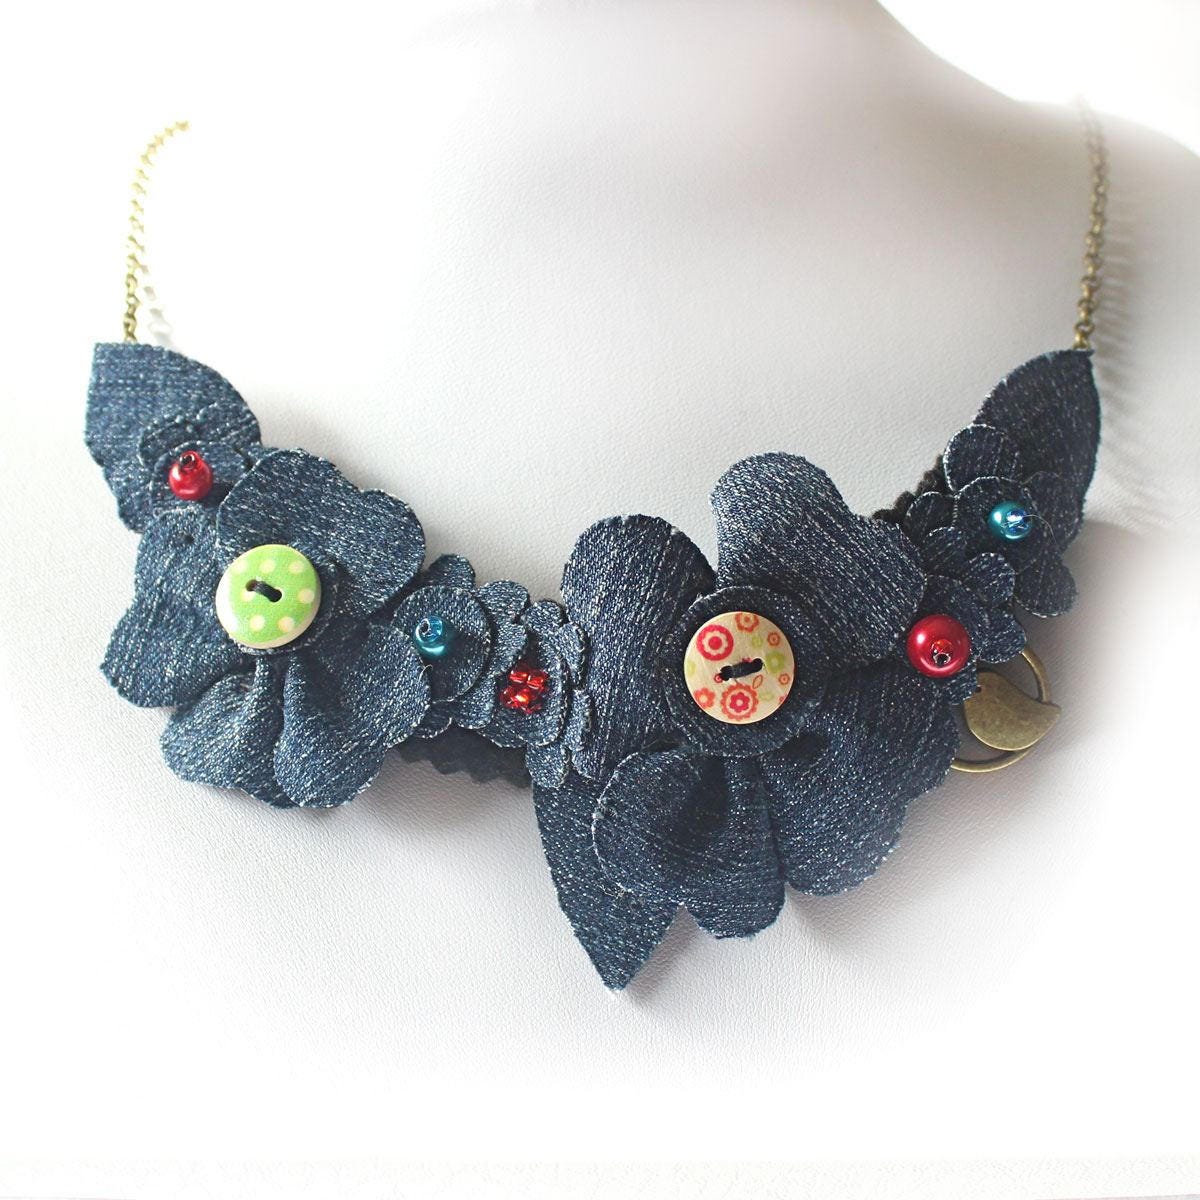 Denim Flower Statement Necklace, Blue Jean Floral Accessory, Hippy Chic Upcycled Jewelry Made To Order